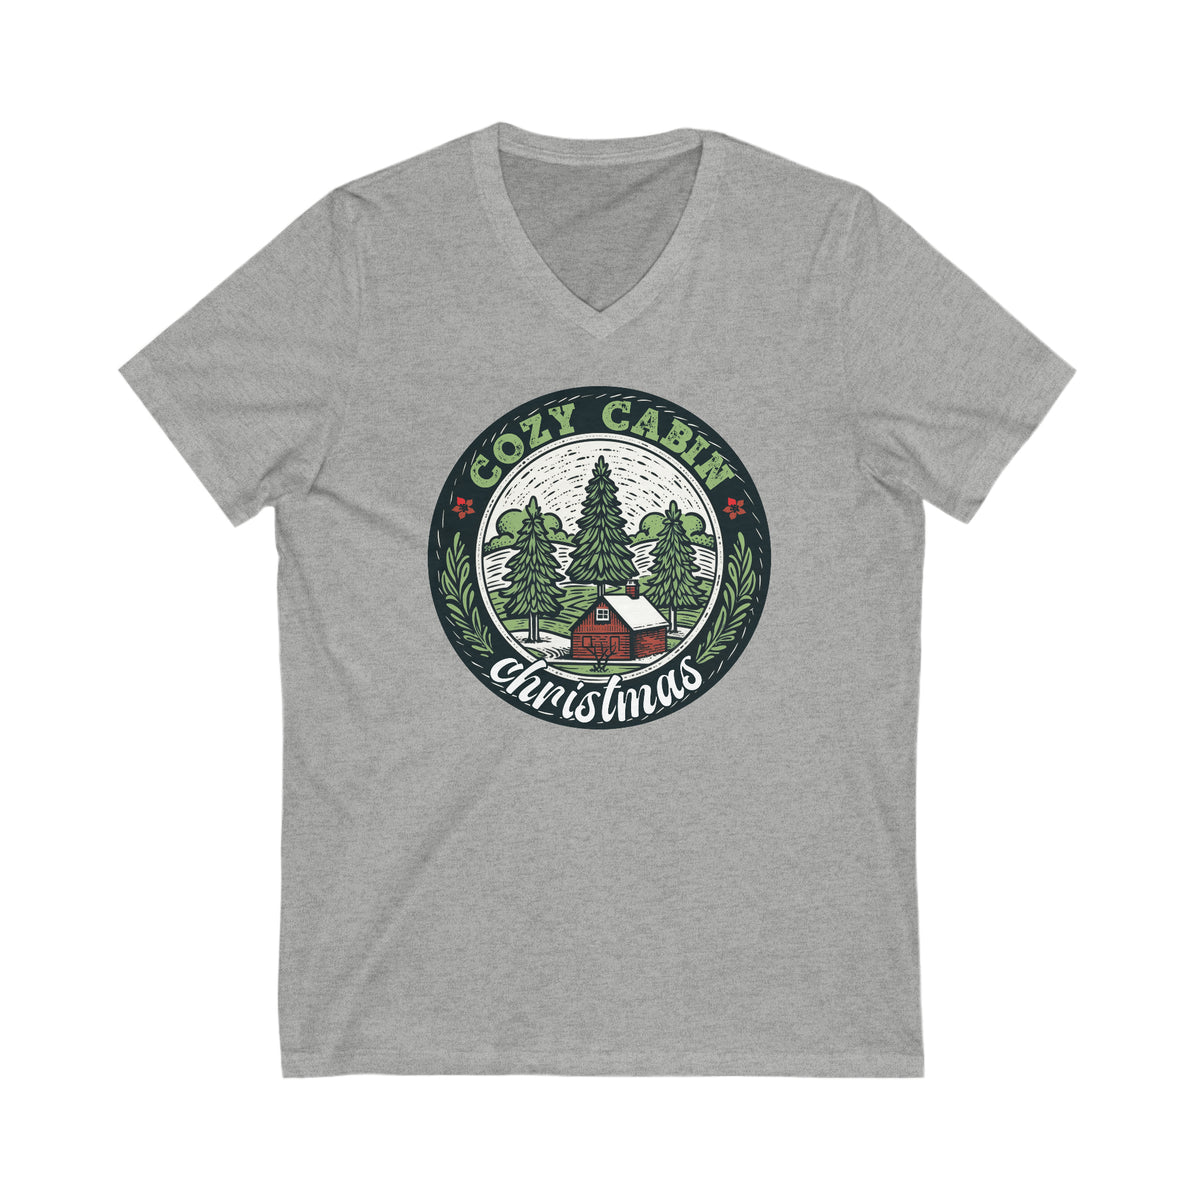 Cozy Cabin Christmas Tree Shirt | Vintage Christmas Gift For Her | Unisex Jersey V-neck T-shirt